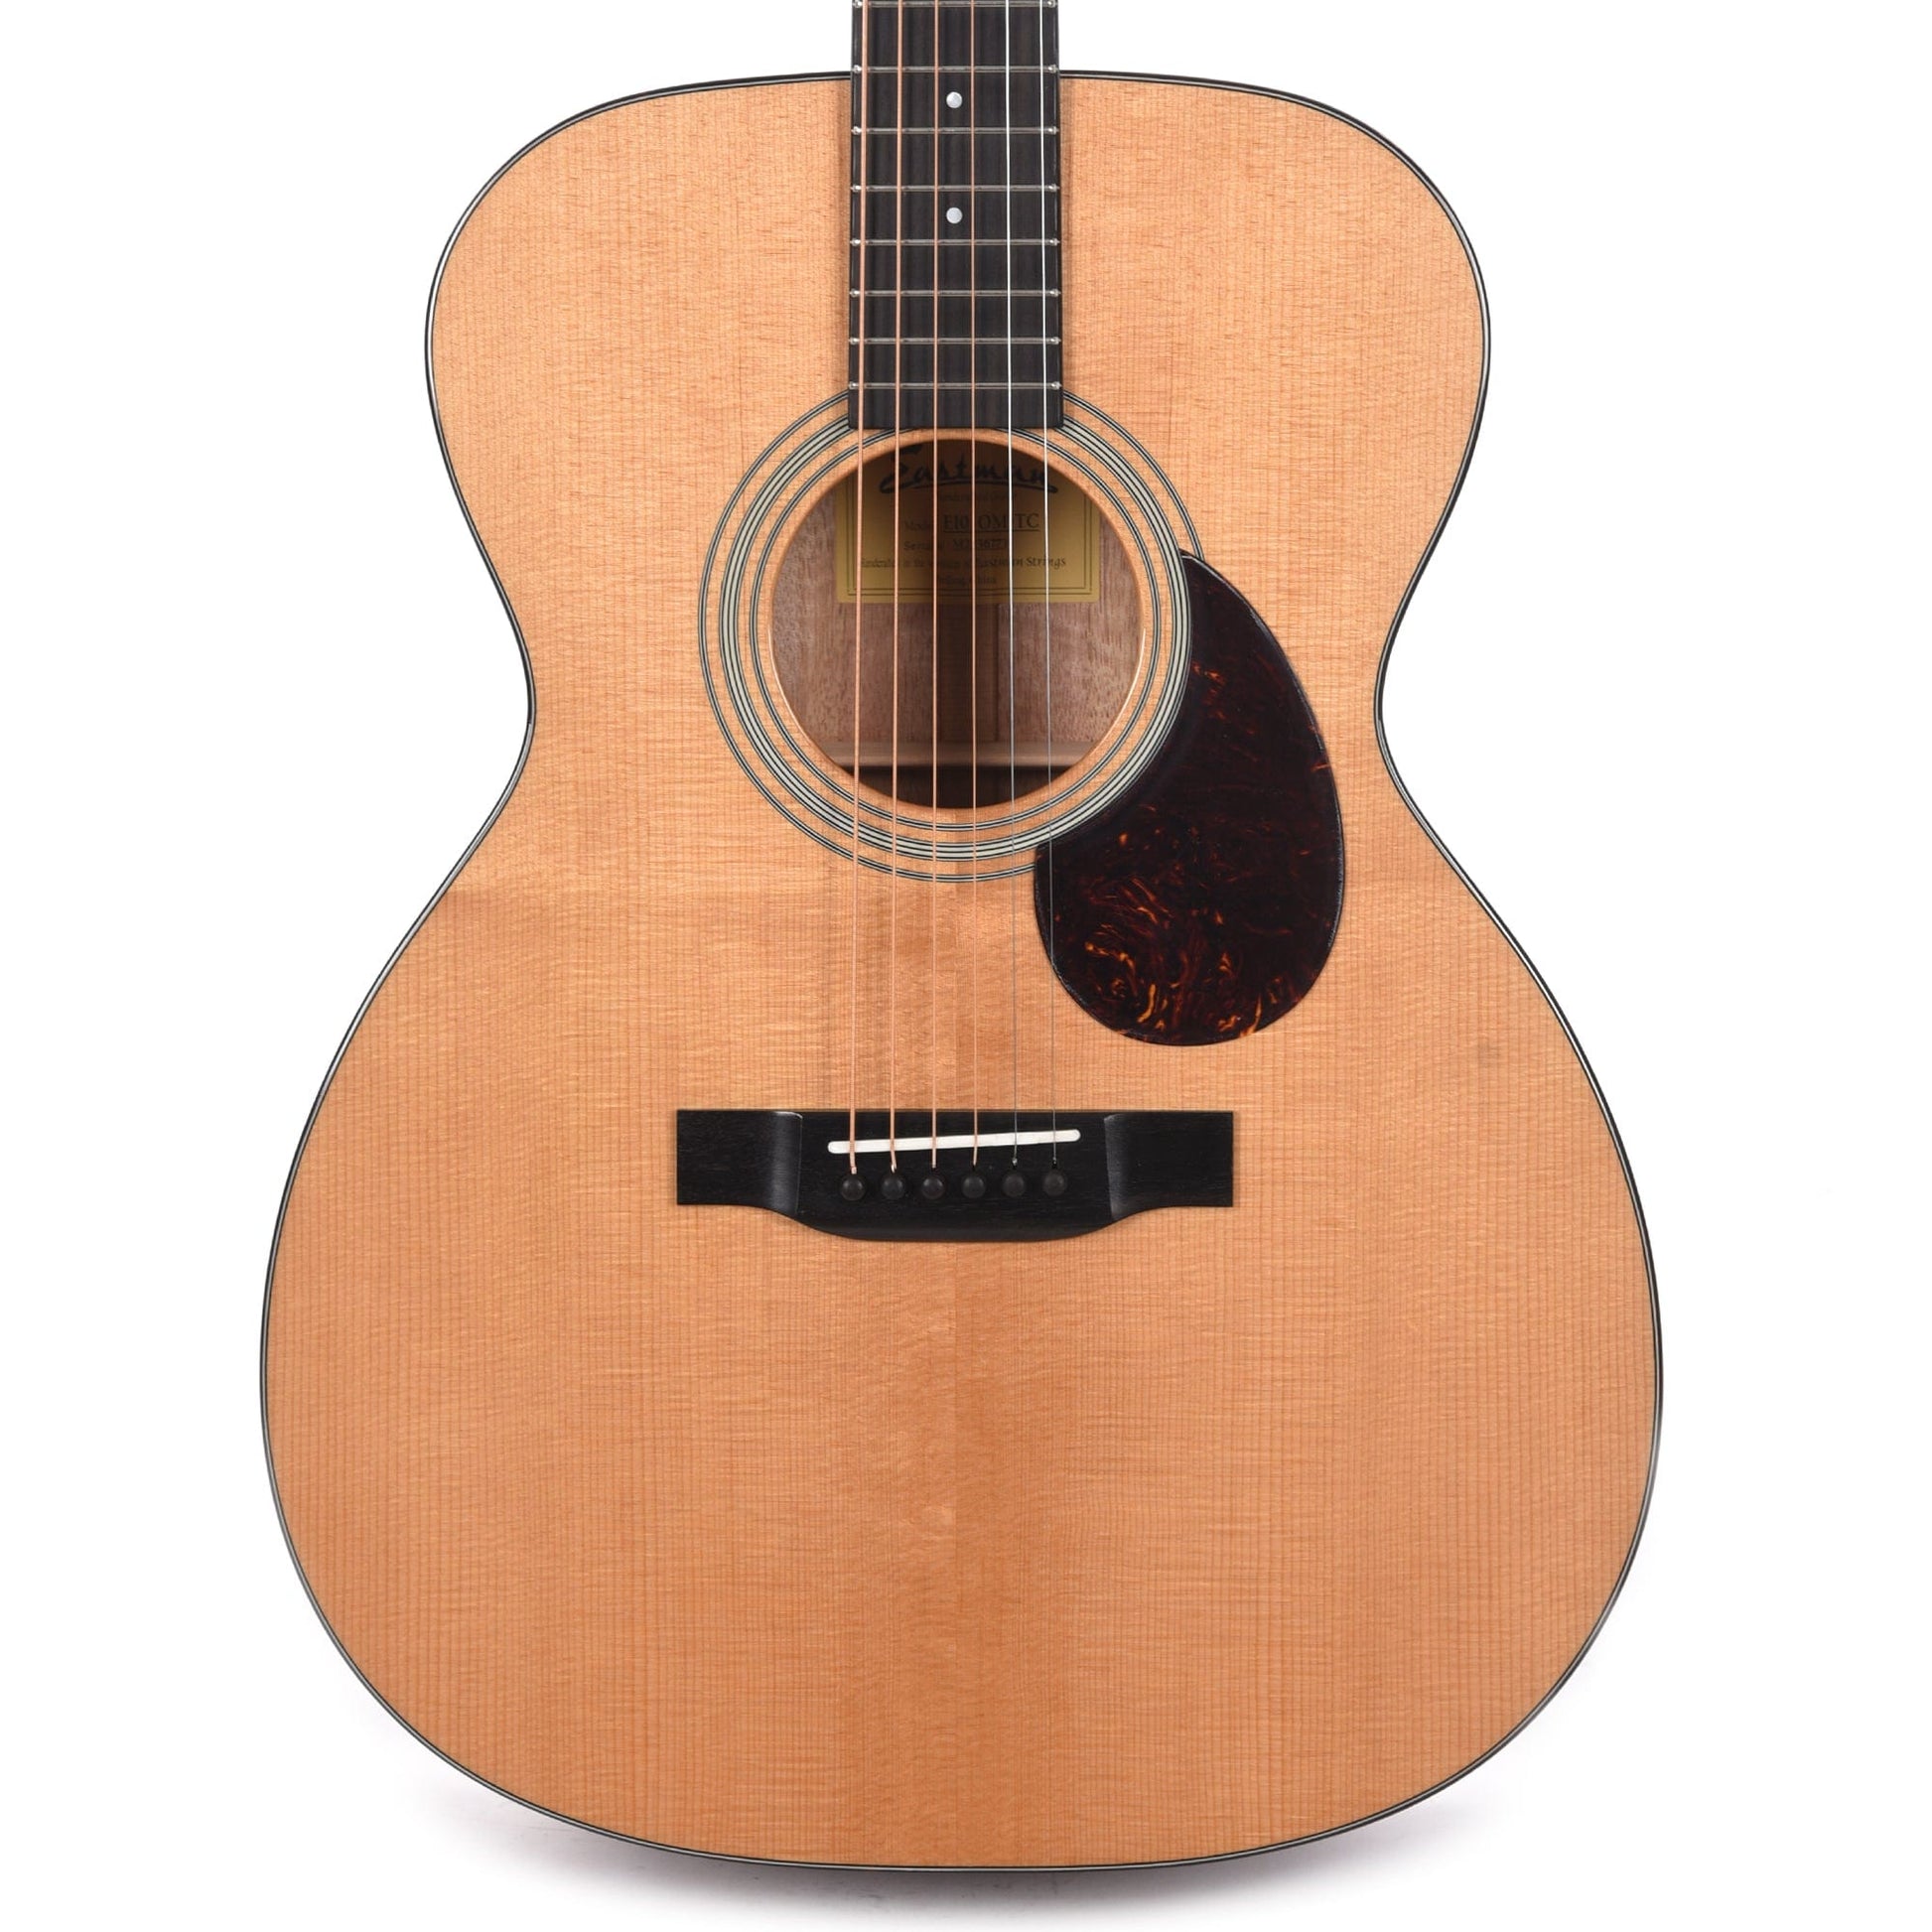 Eastman E10OM-TC Thermo Cured Adirondack Spruce/Mahogany OM Natural Acoustic Guitars / OM and Auditorium